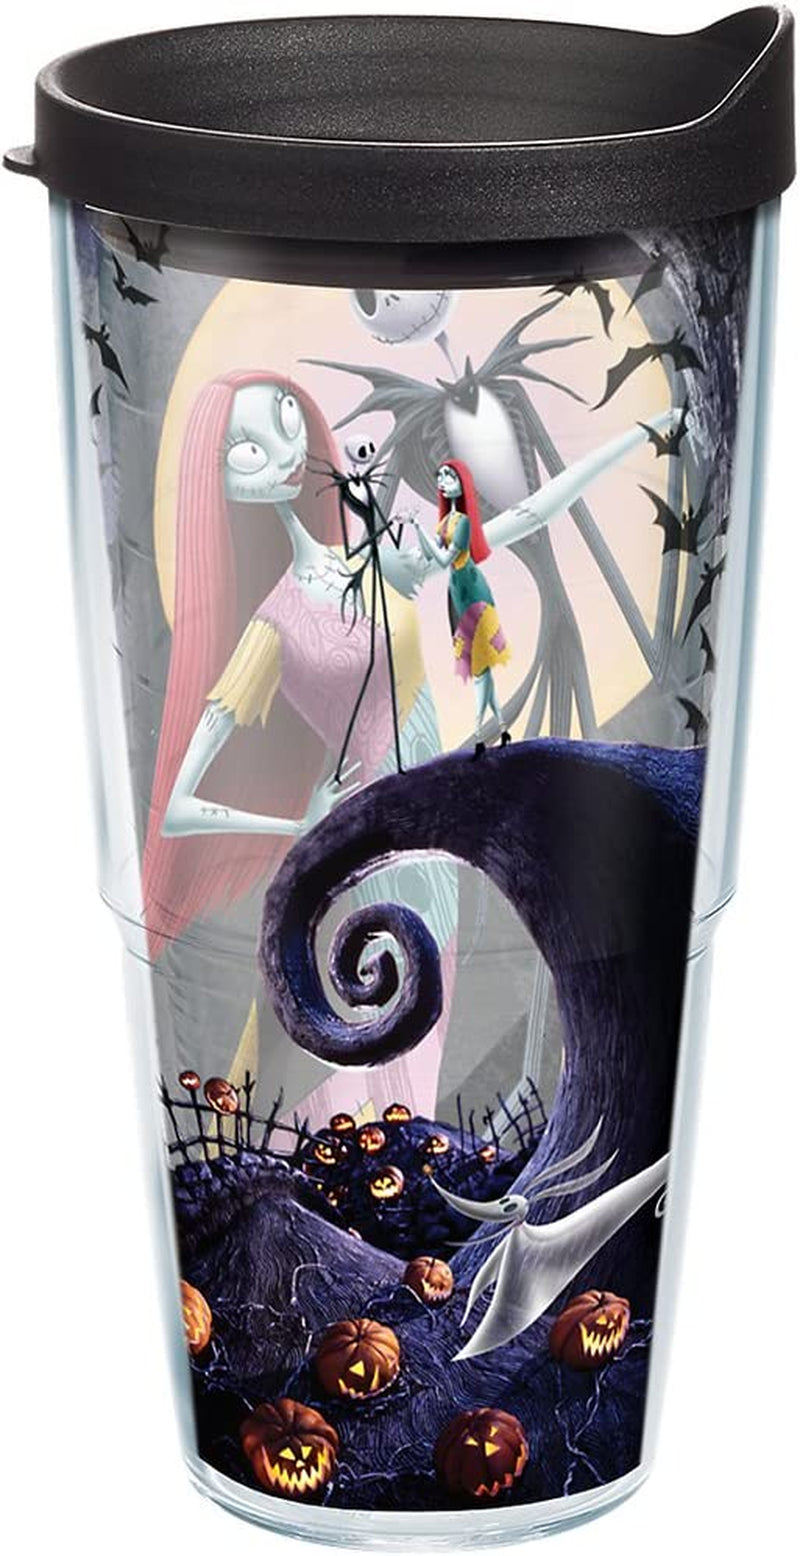 Tervis Tumbler with Lid, Jack Skellington and Sally Welcome the Holidays in This Disney a Nightmare before Christmas Design That Keeps Your Drinks from Going All Oogie Boogie. , Black